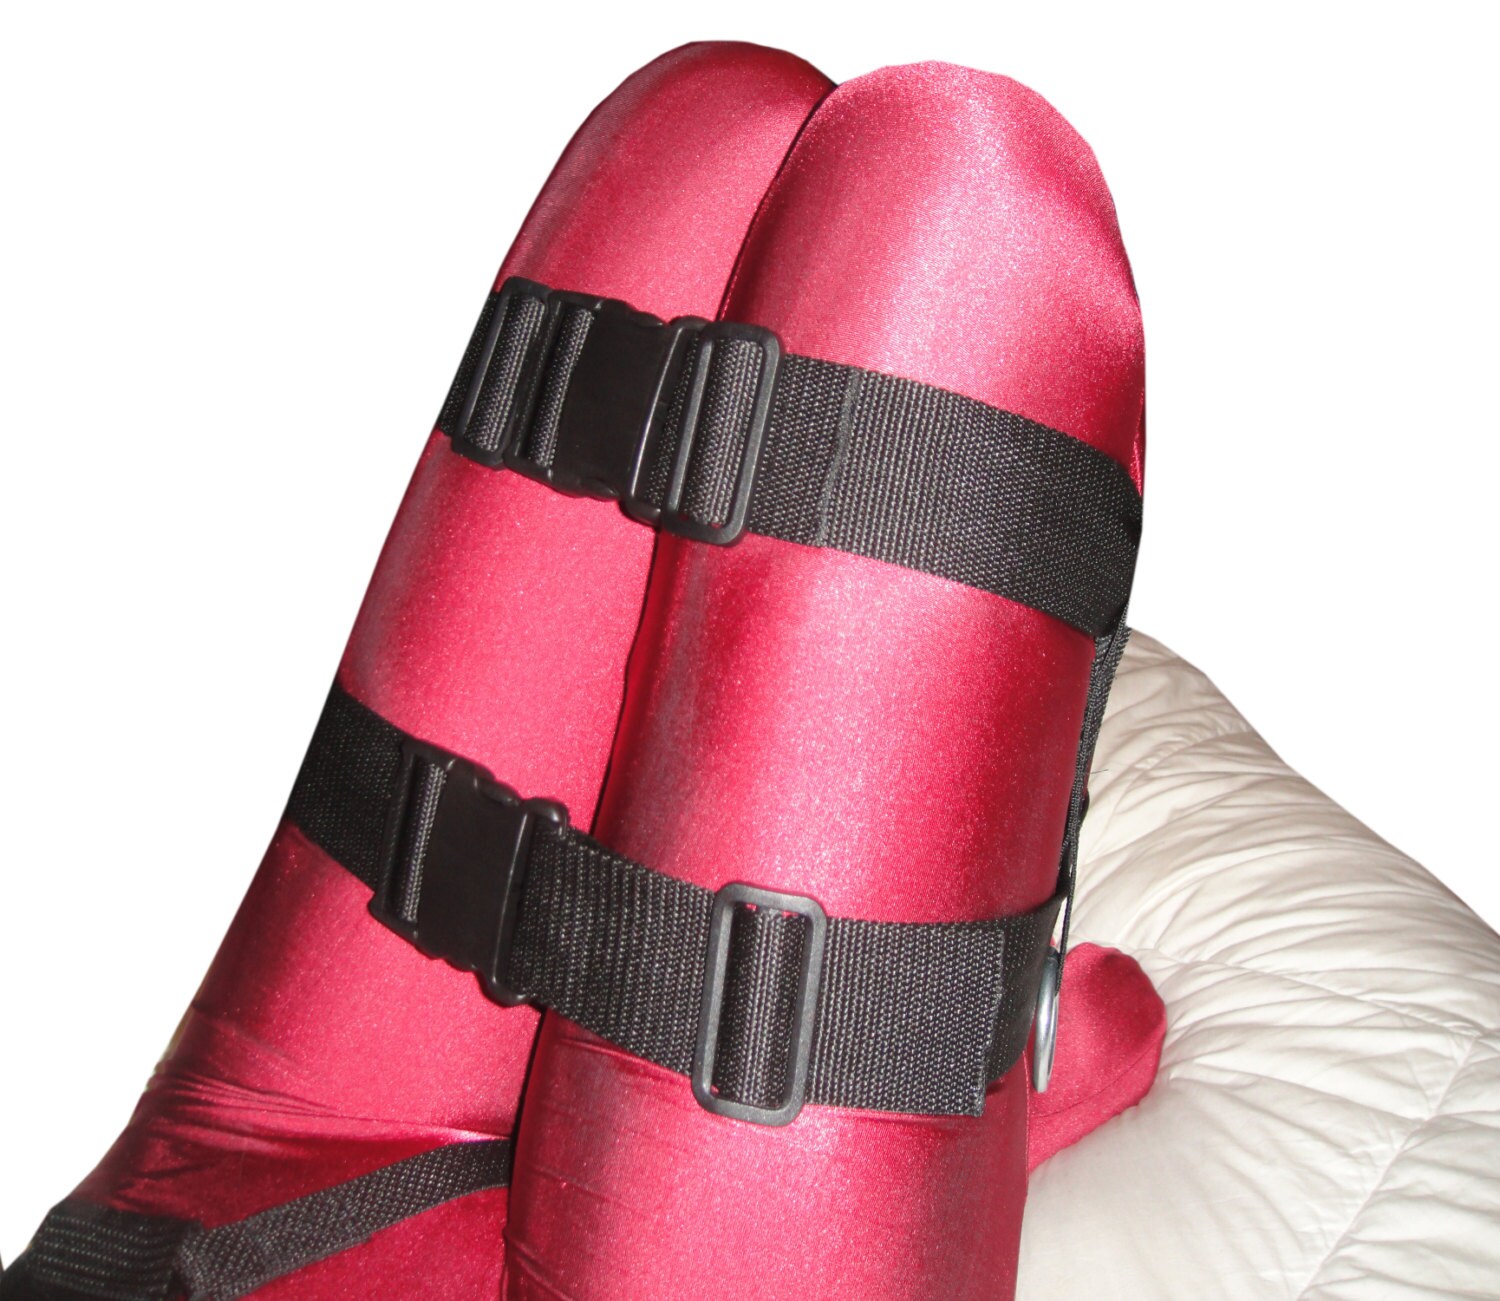 Thigh to Ankle Bondage Harness for Hogtie Ratchet Attachment (Nylon Webbing) photo